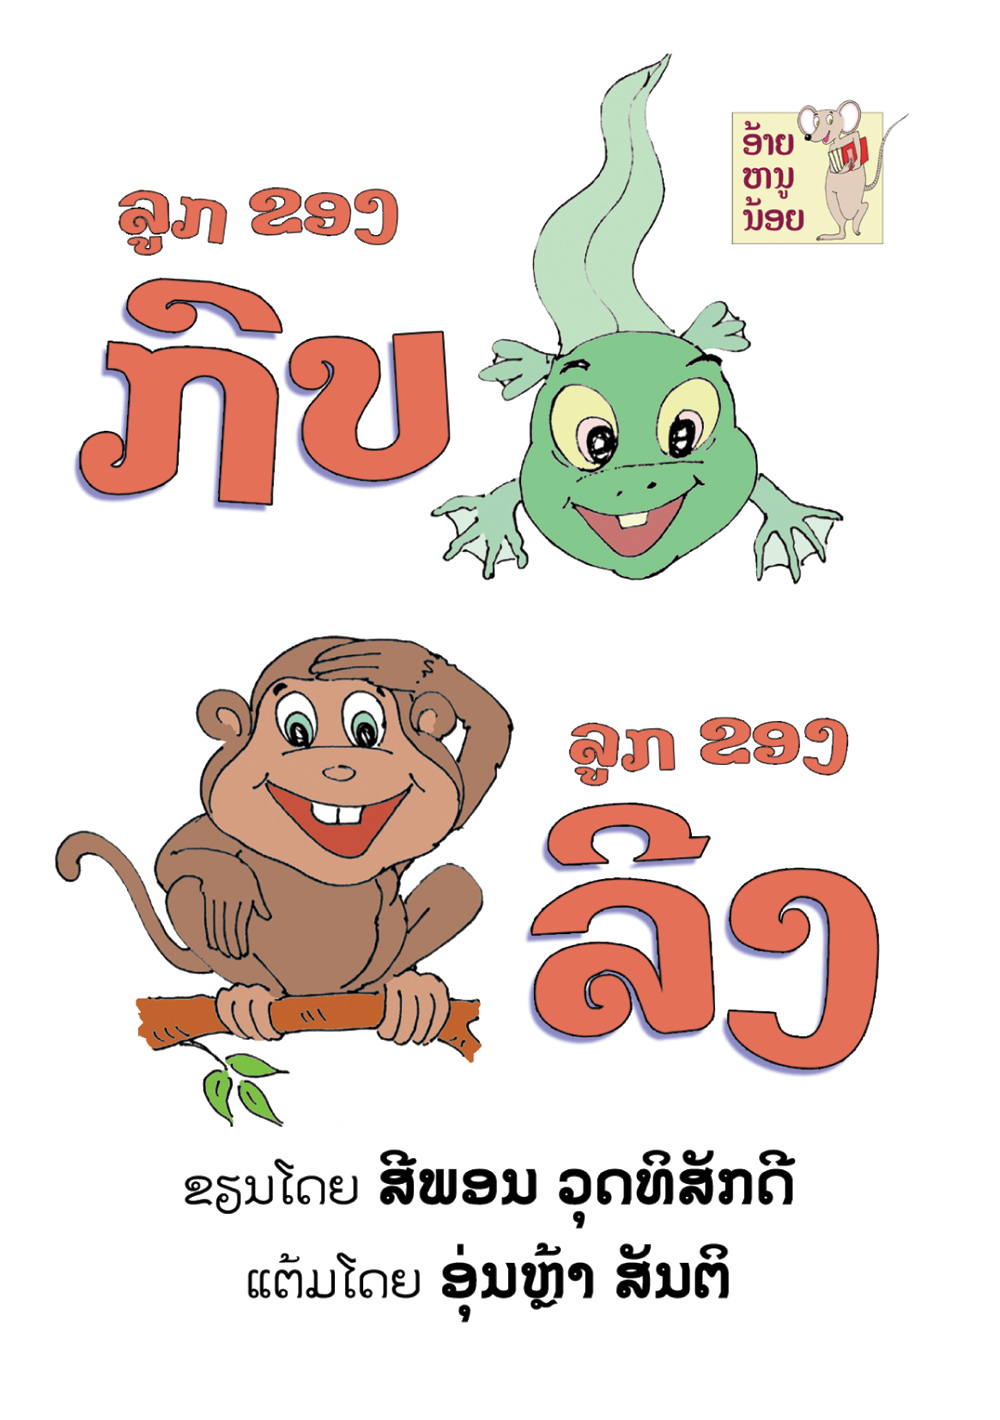 Baby Frog, Baby Monkey large book cover, published in Lao language